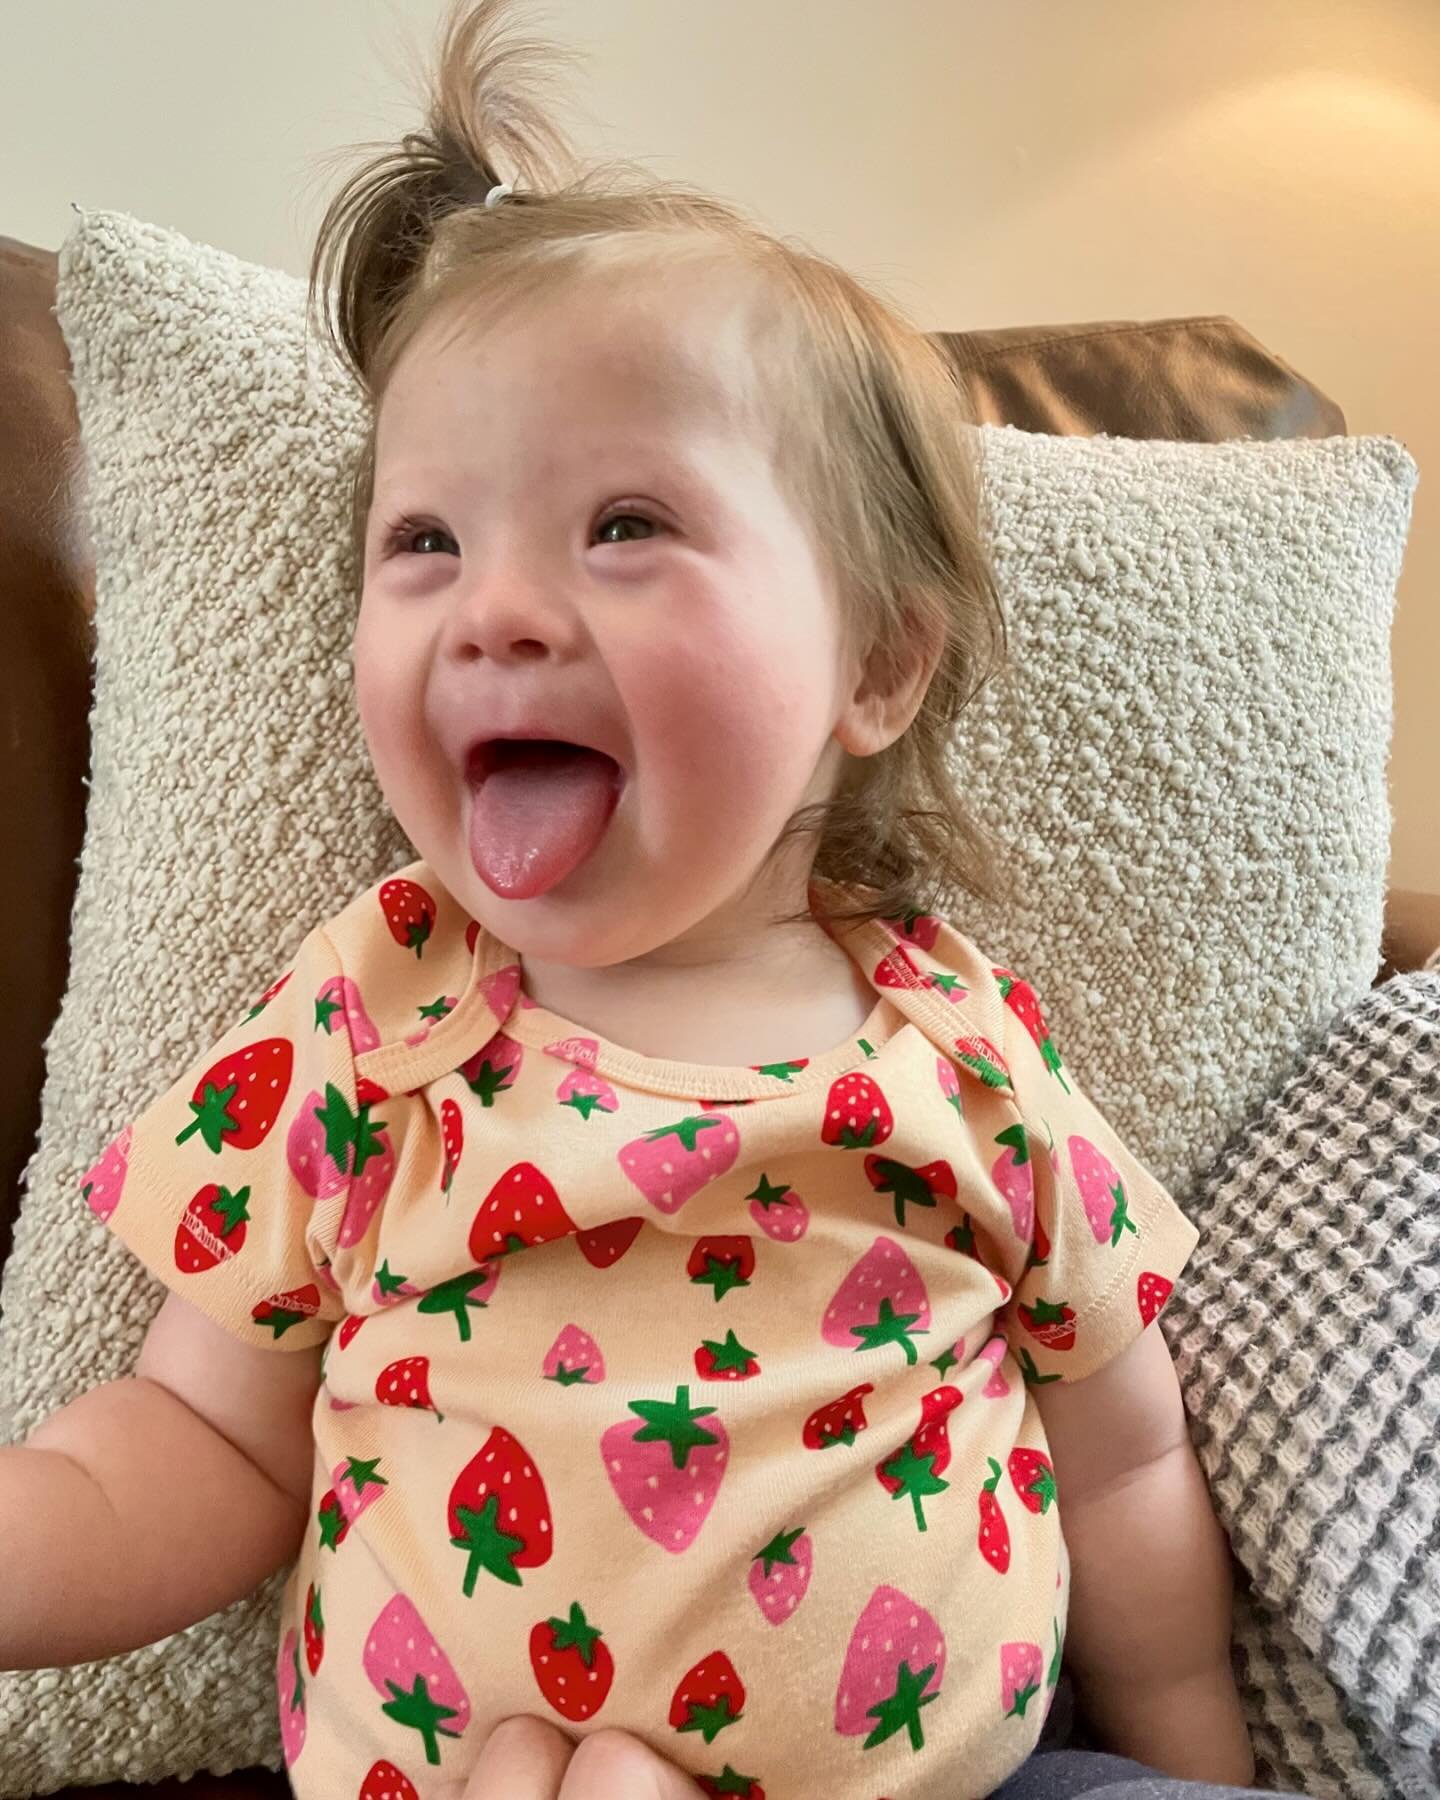 She most certainly is the sweetest strawberry in the patch. The second picture 😂 
💙💛💙💛
www.themargomission.com
💛💙💛💙
#t21 #downsyndromelove #ourlittlepearl #aintnothindownaboutit #downsyndrome #DS #seeingabilities #livingtheluckylife #upsyndr